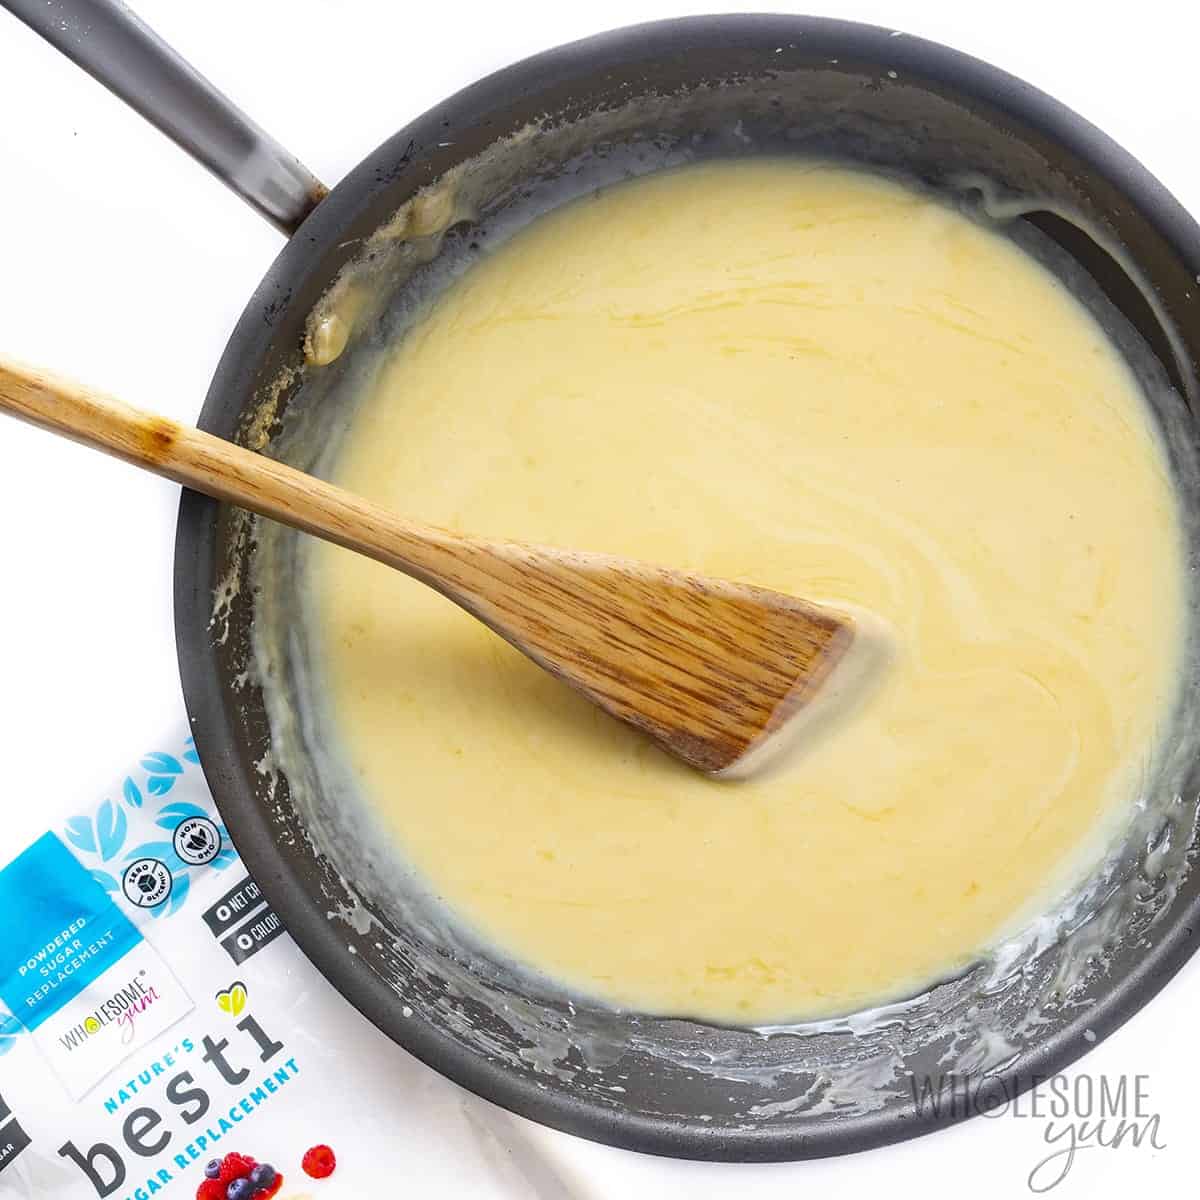 Unsweetened sweetened condensed milk in a pan.